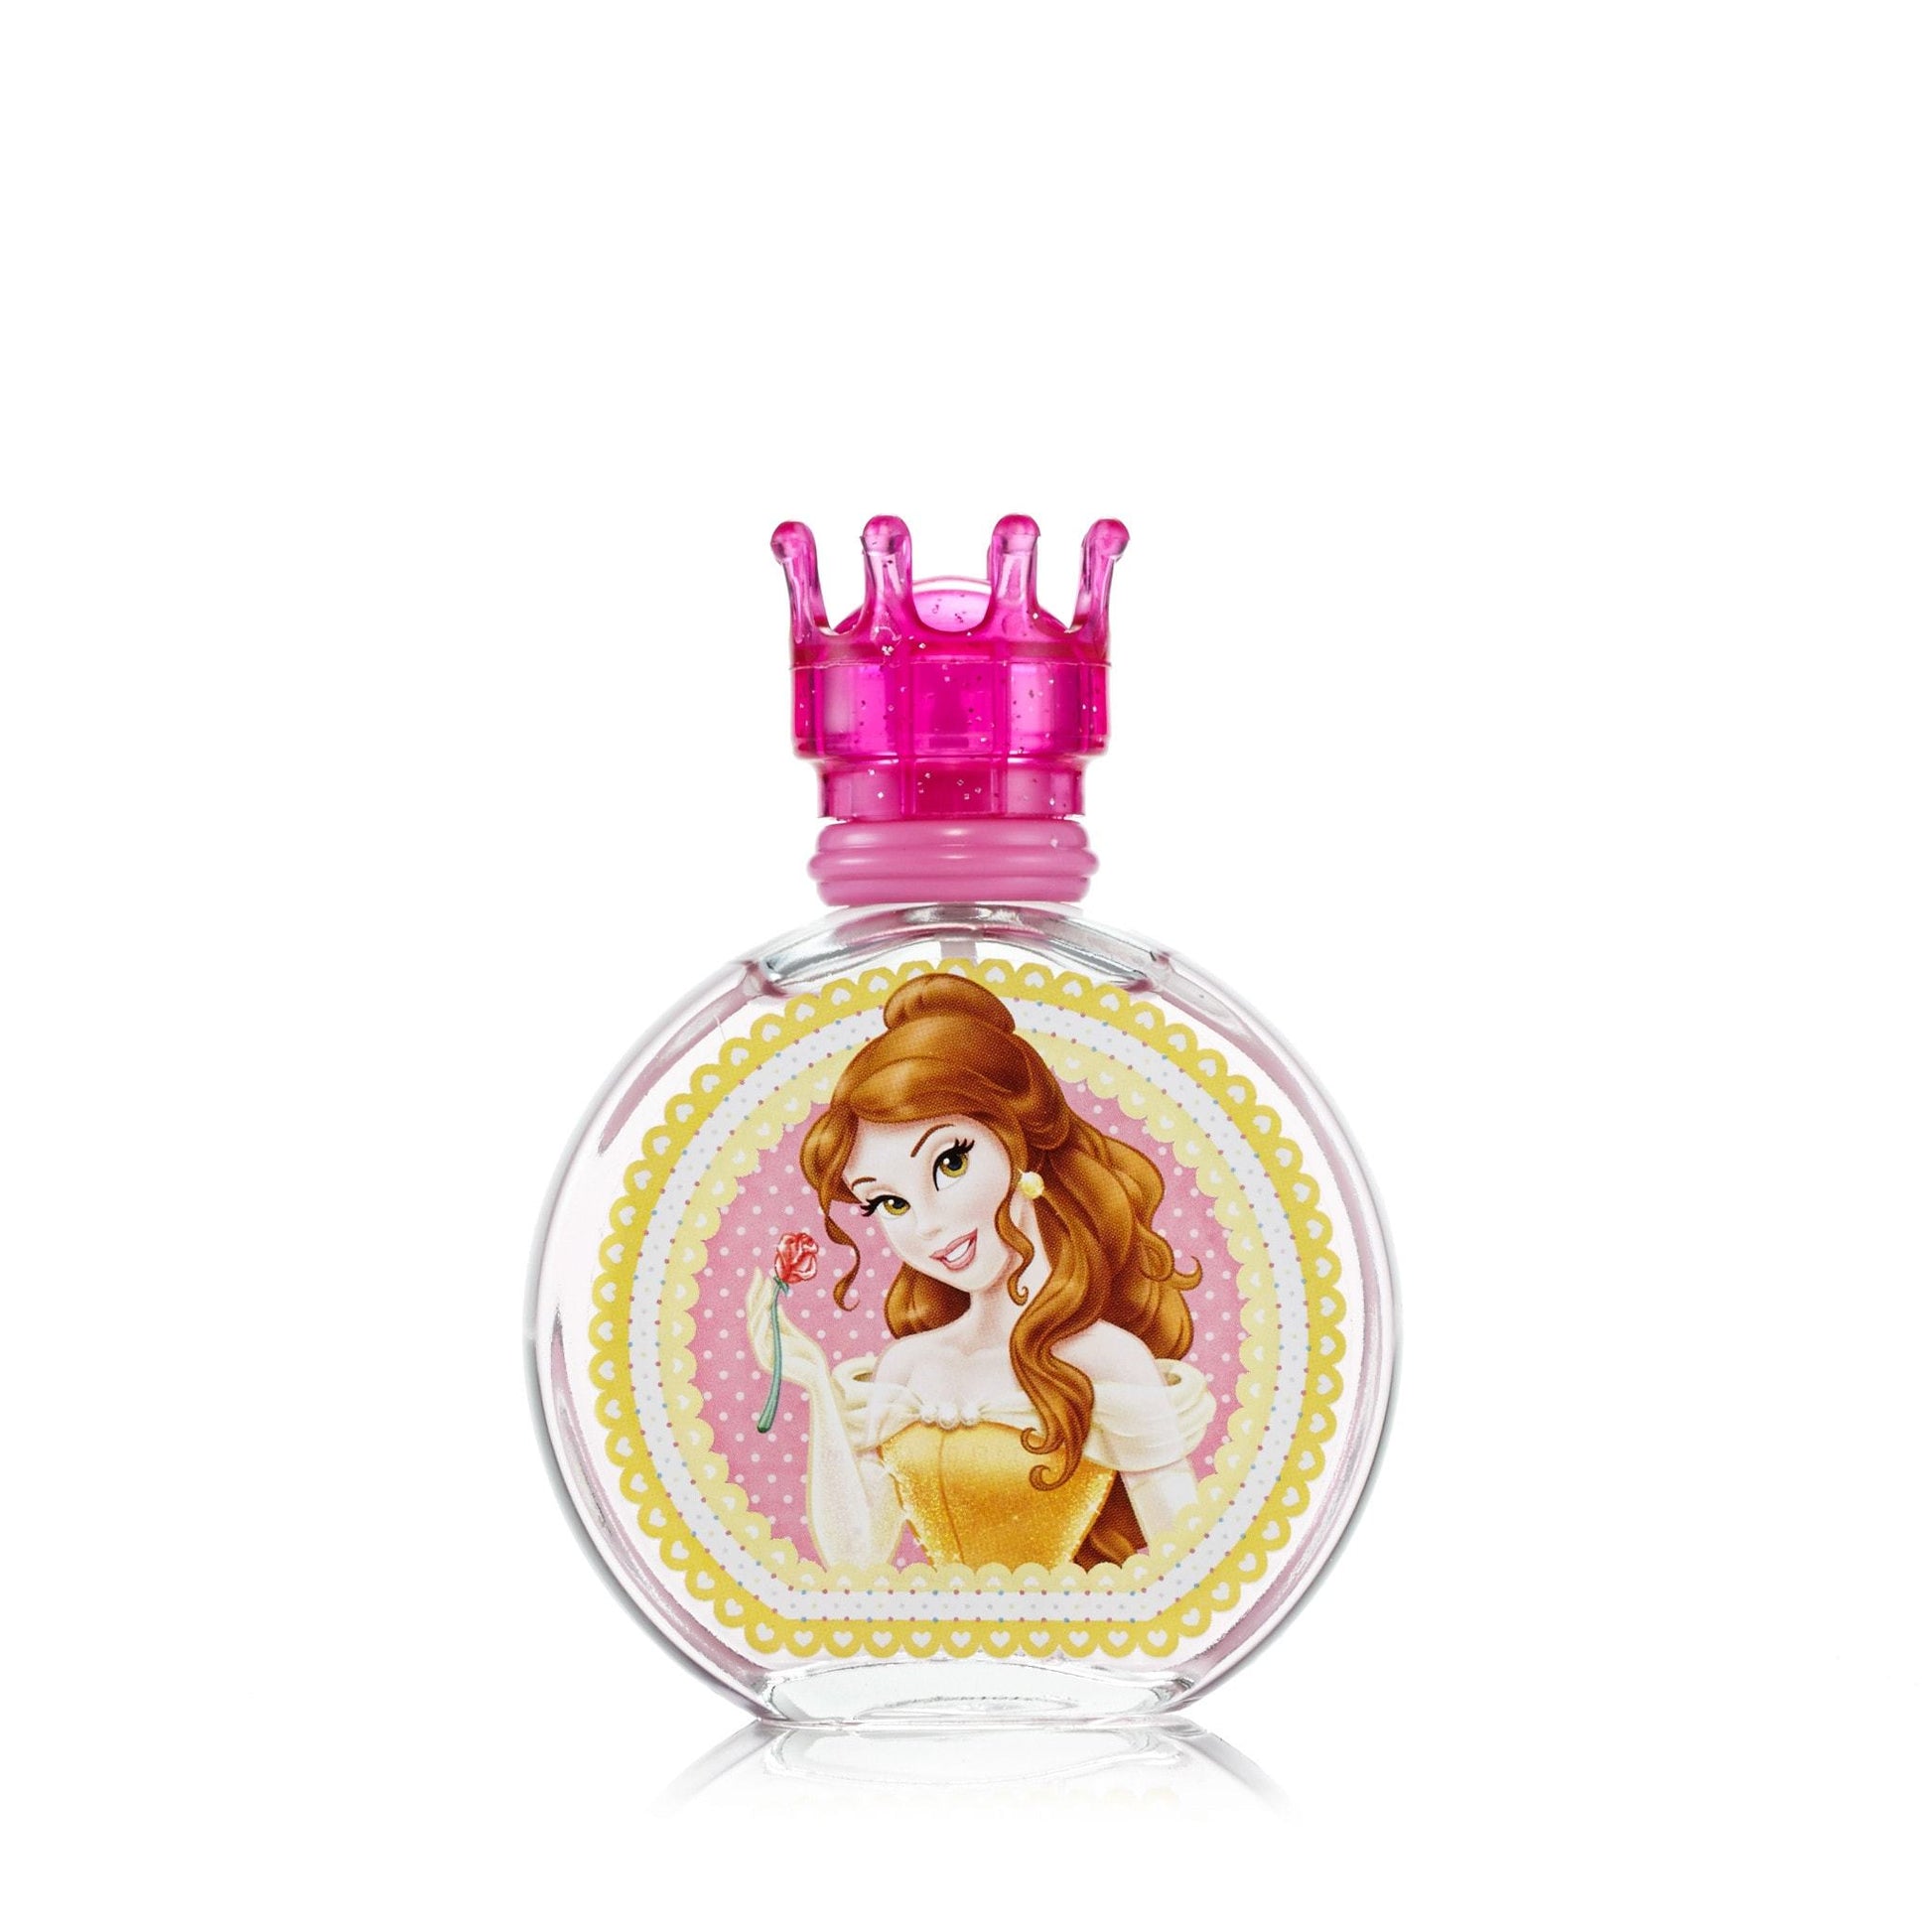 Beauty and the Beast Eau de Toilette Spray for Girls by Disney, Product image 2